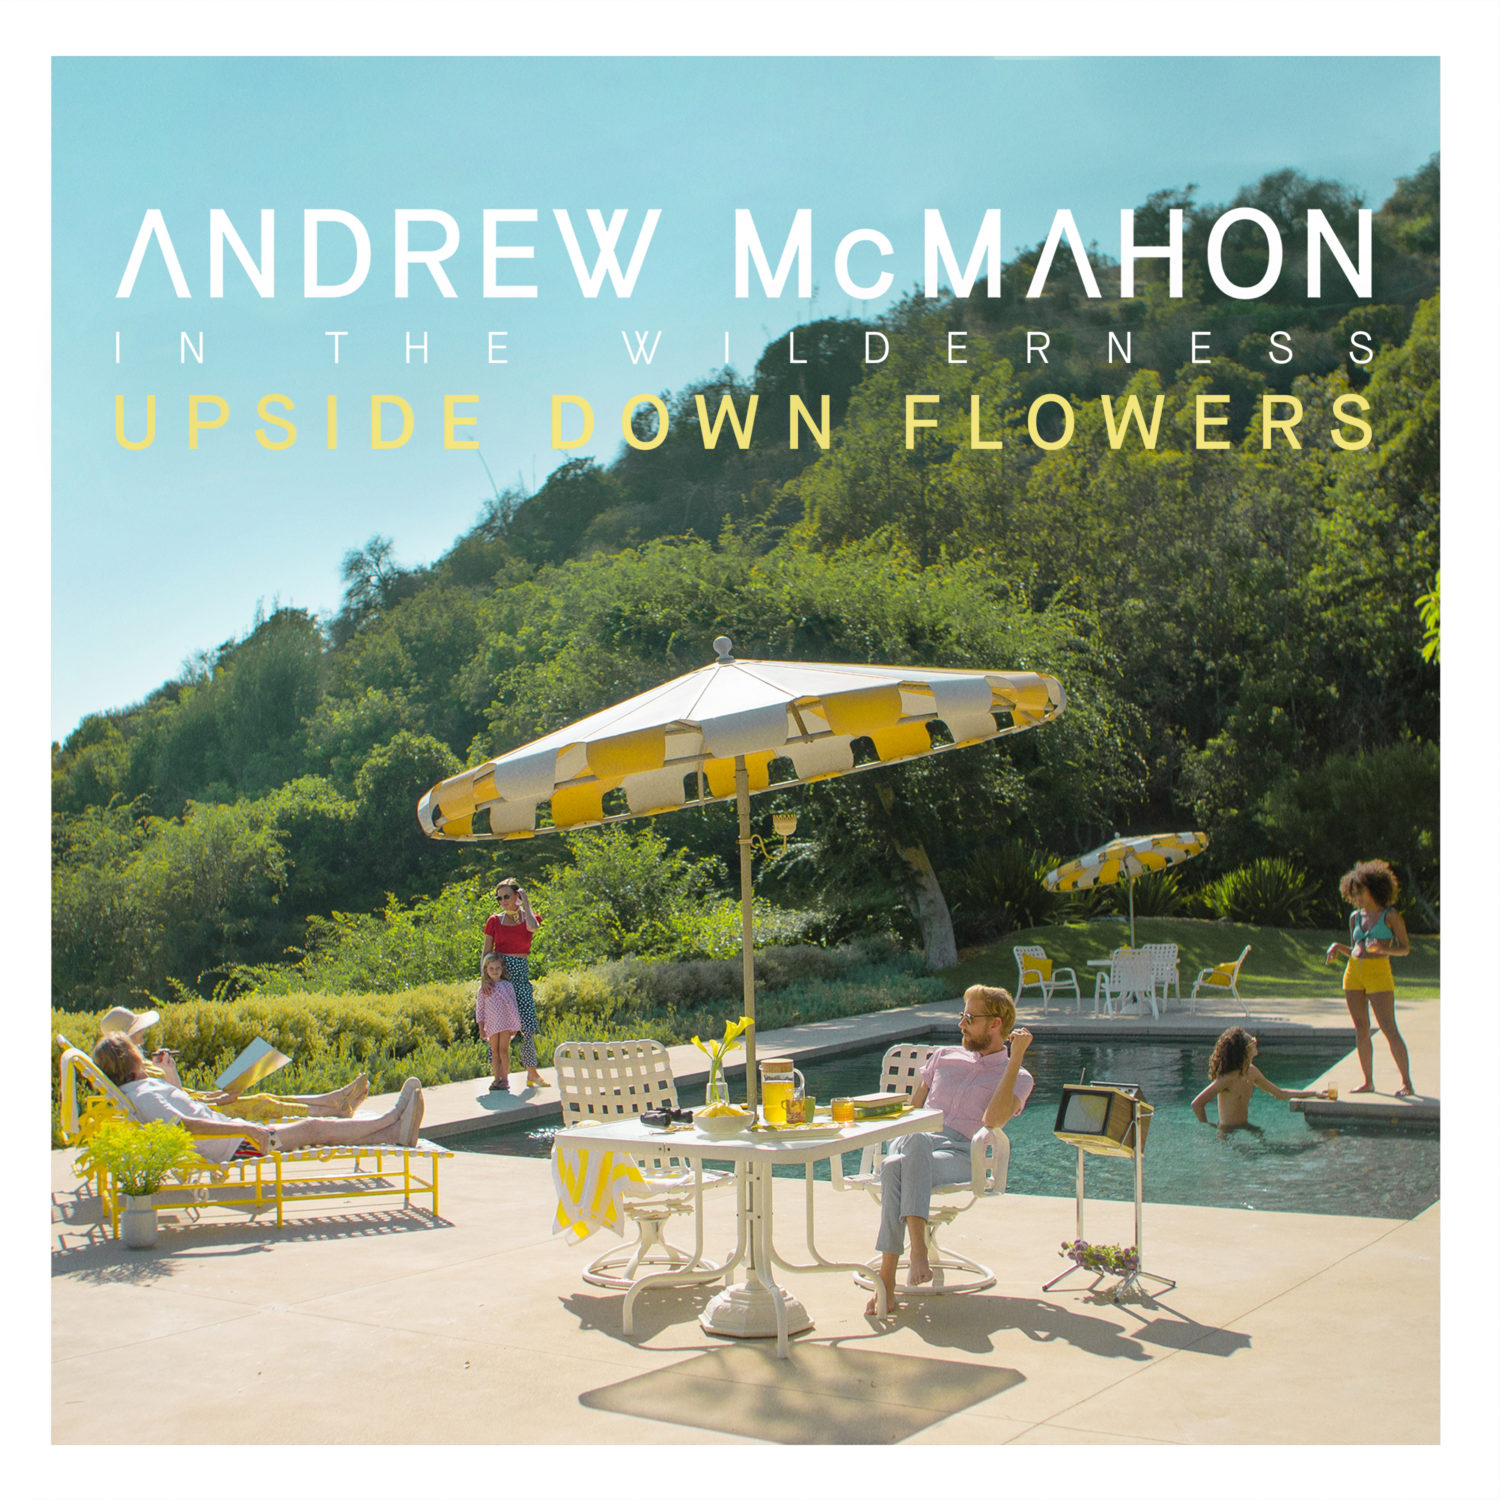 UPSIDE DOWN FLOWERS (NOV 16) Andrew McMahon In The Wilderness